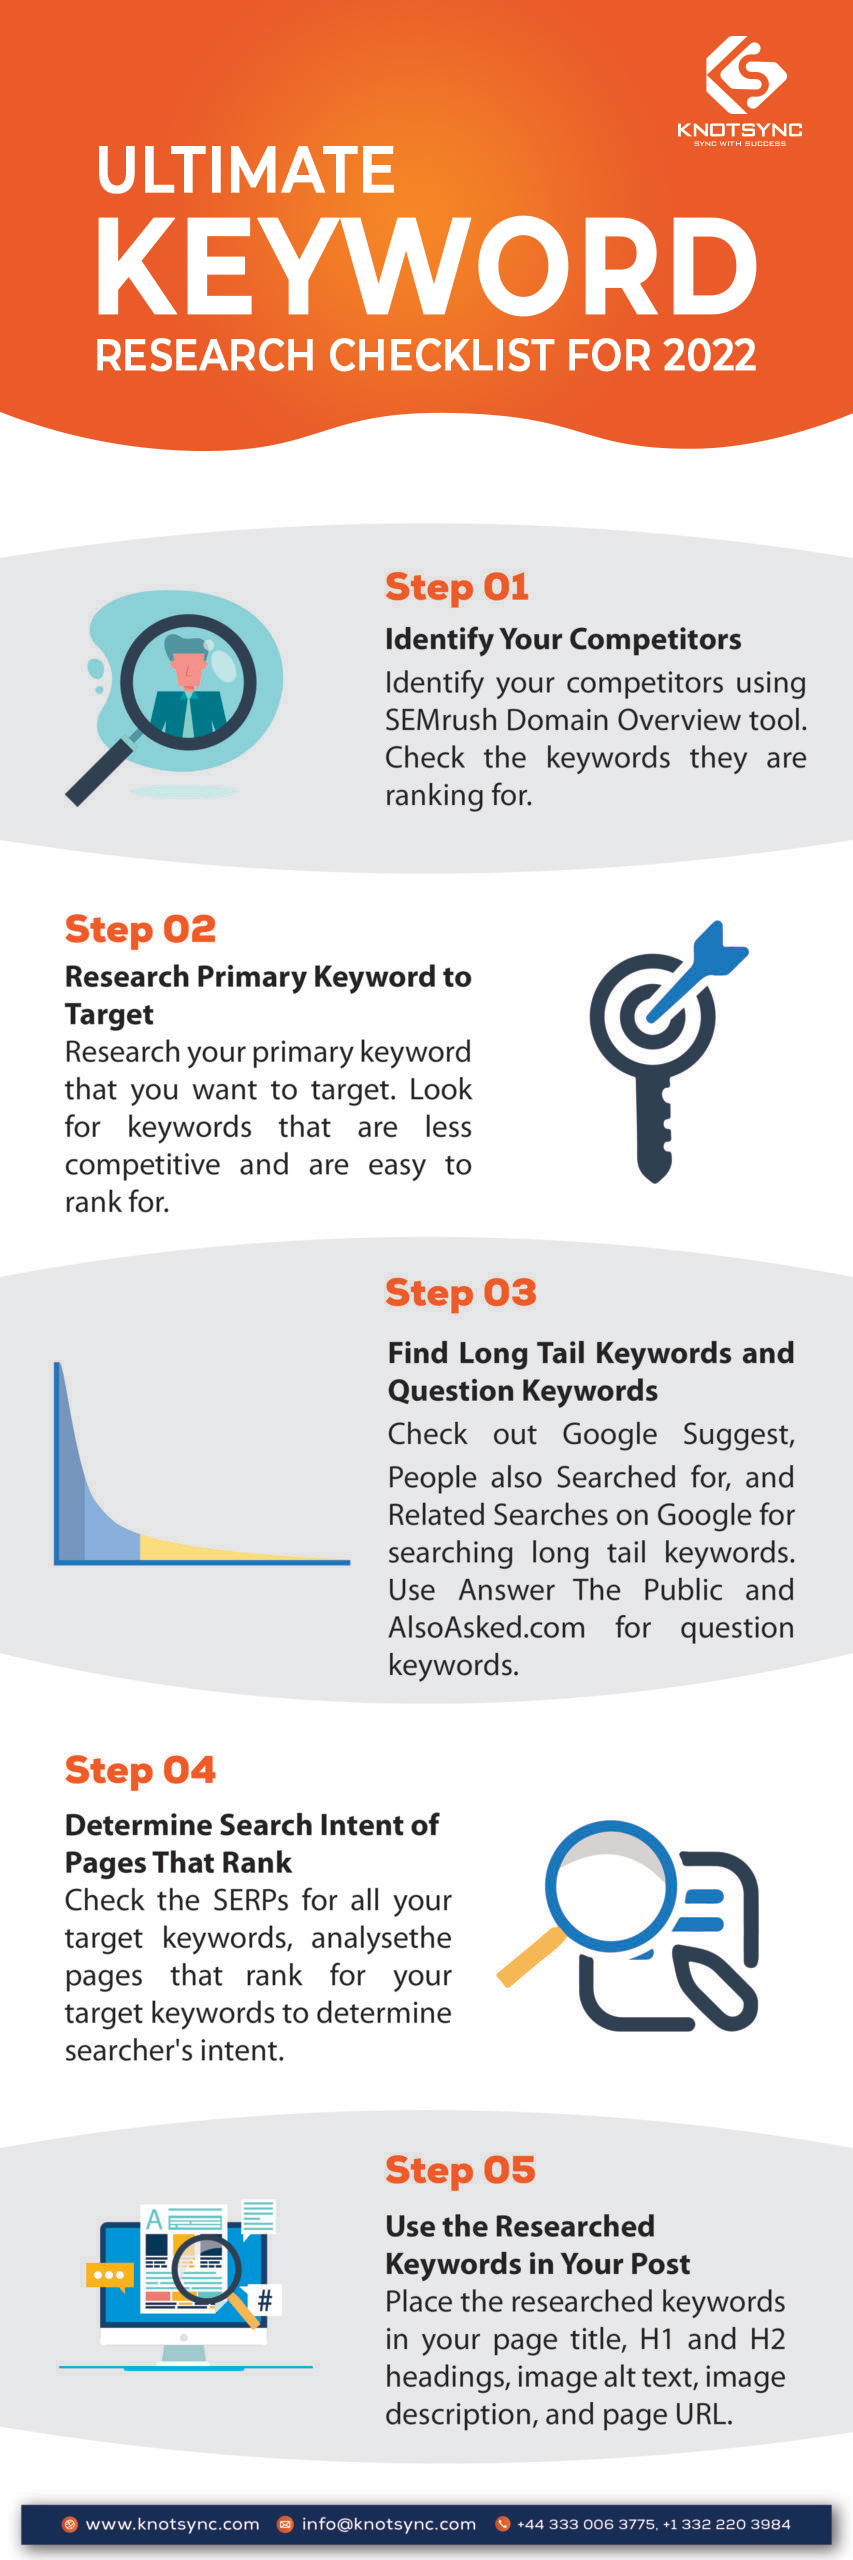 Ultimate Keyword Research Checklist for 2022